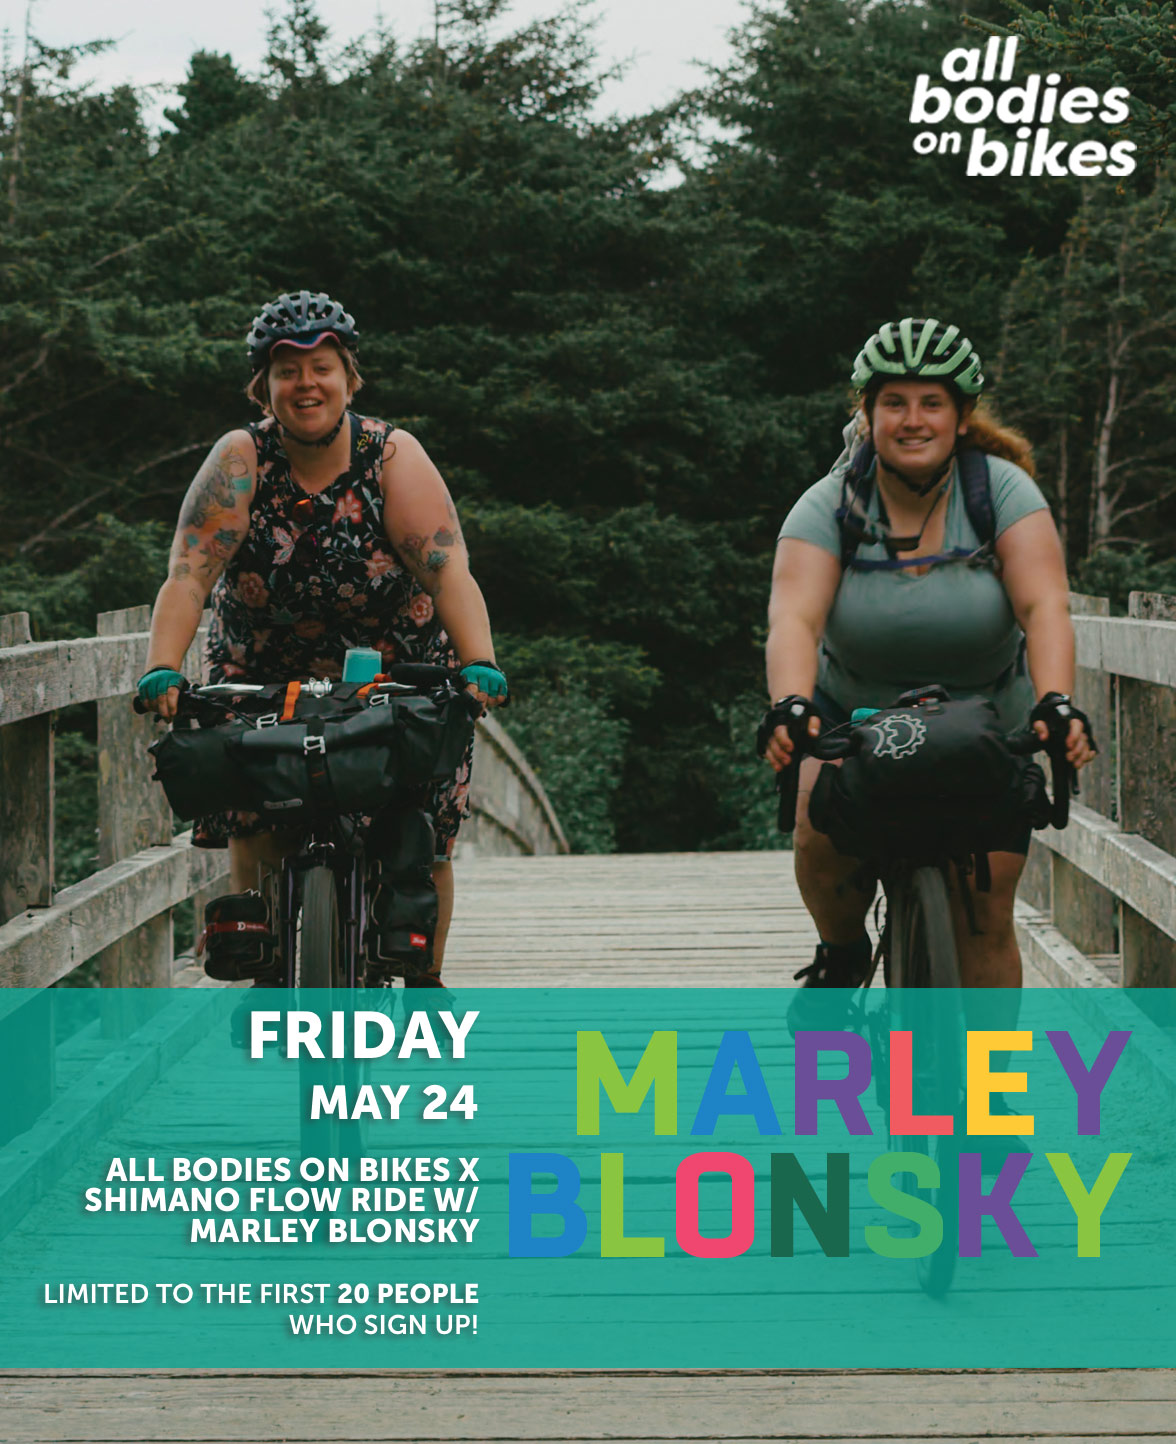 All bodies on bikes with Marley Blonsky presented by Shimano